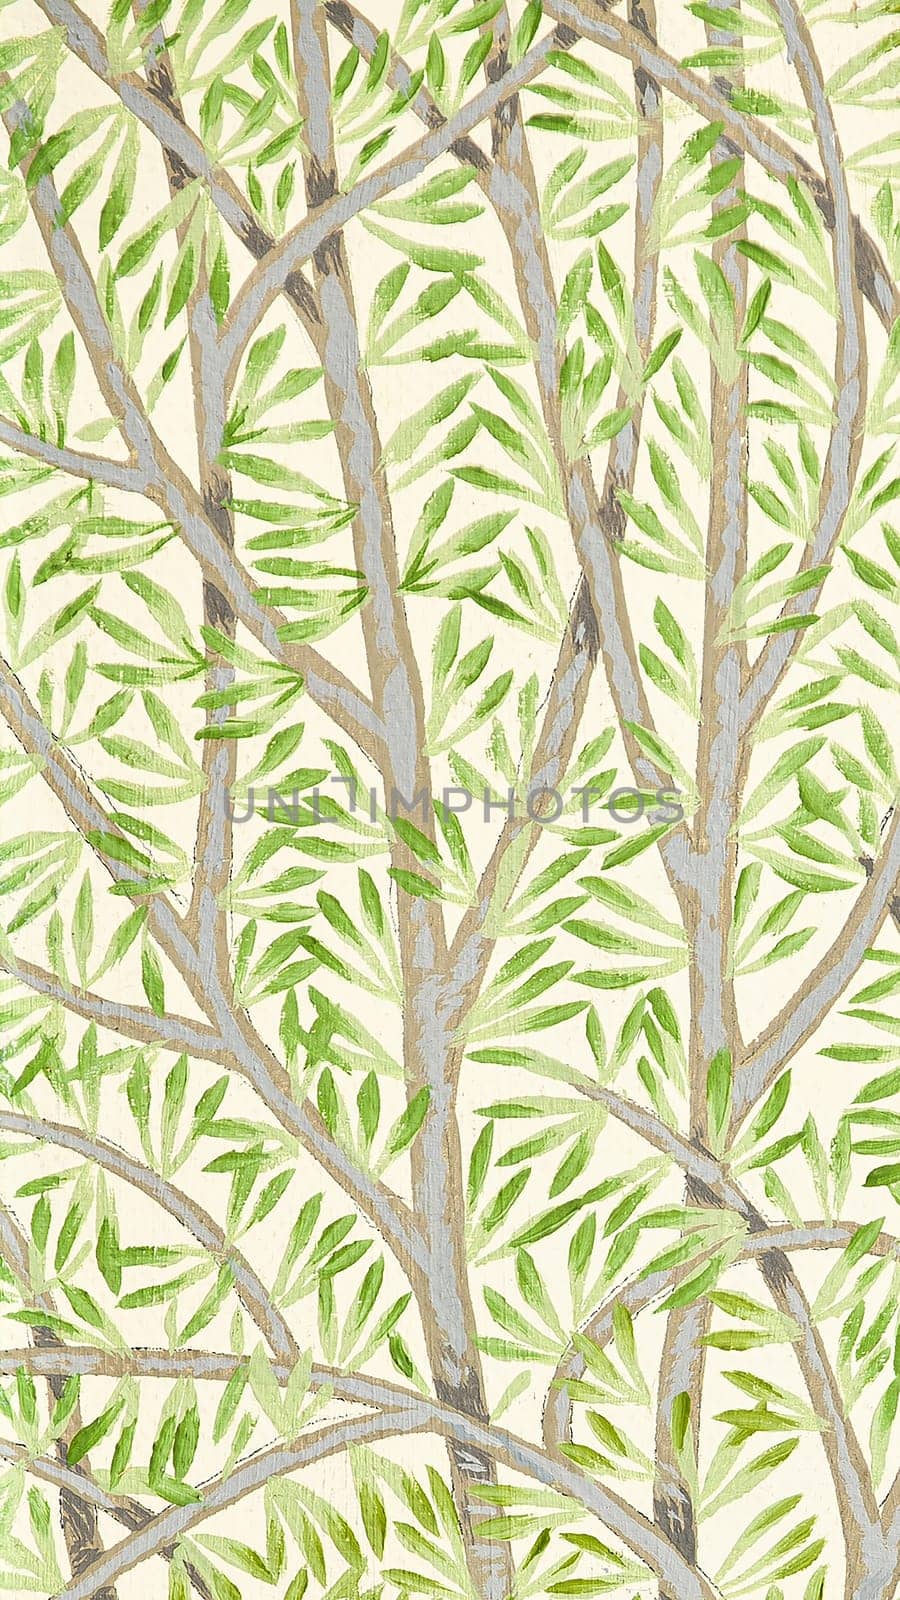 A vertical illustrated design of tree branches with green leaves on a beige background